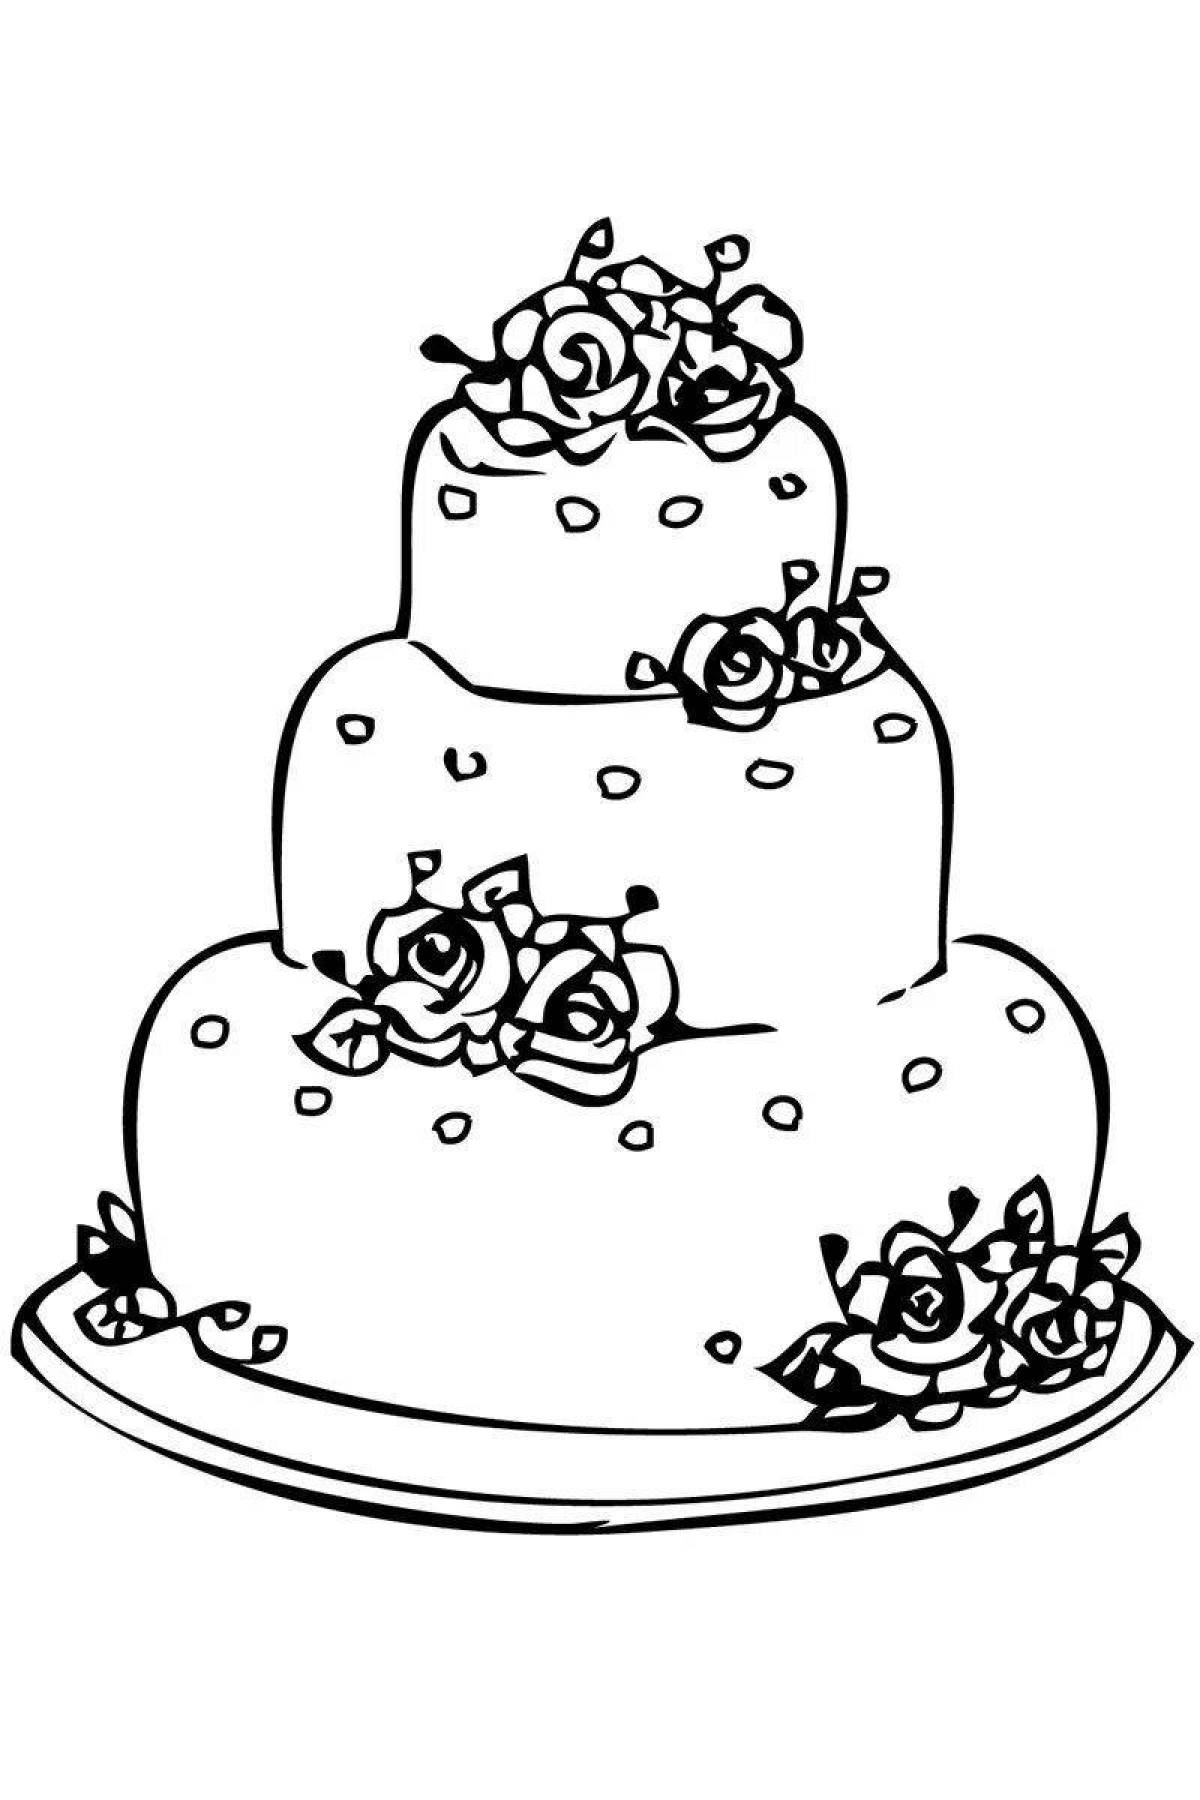 Delicious cake coloring page for kids